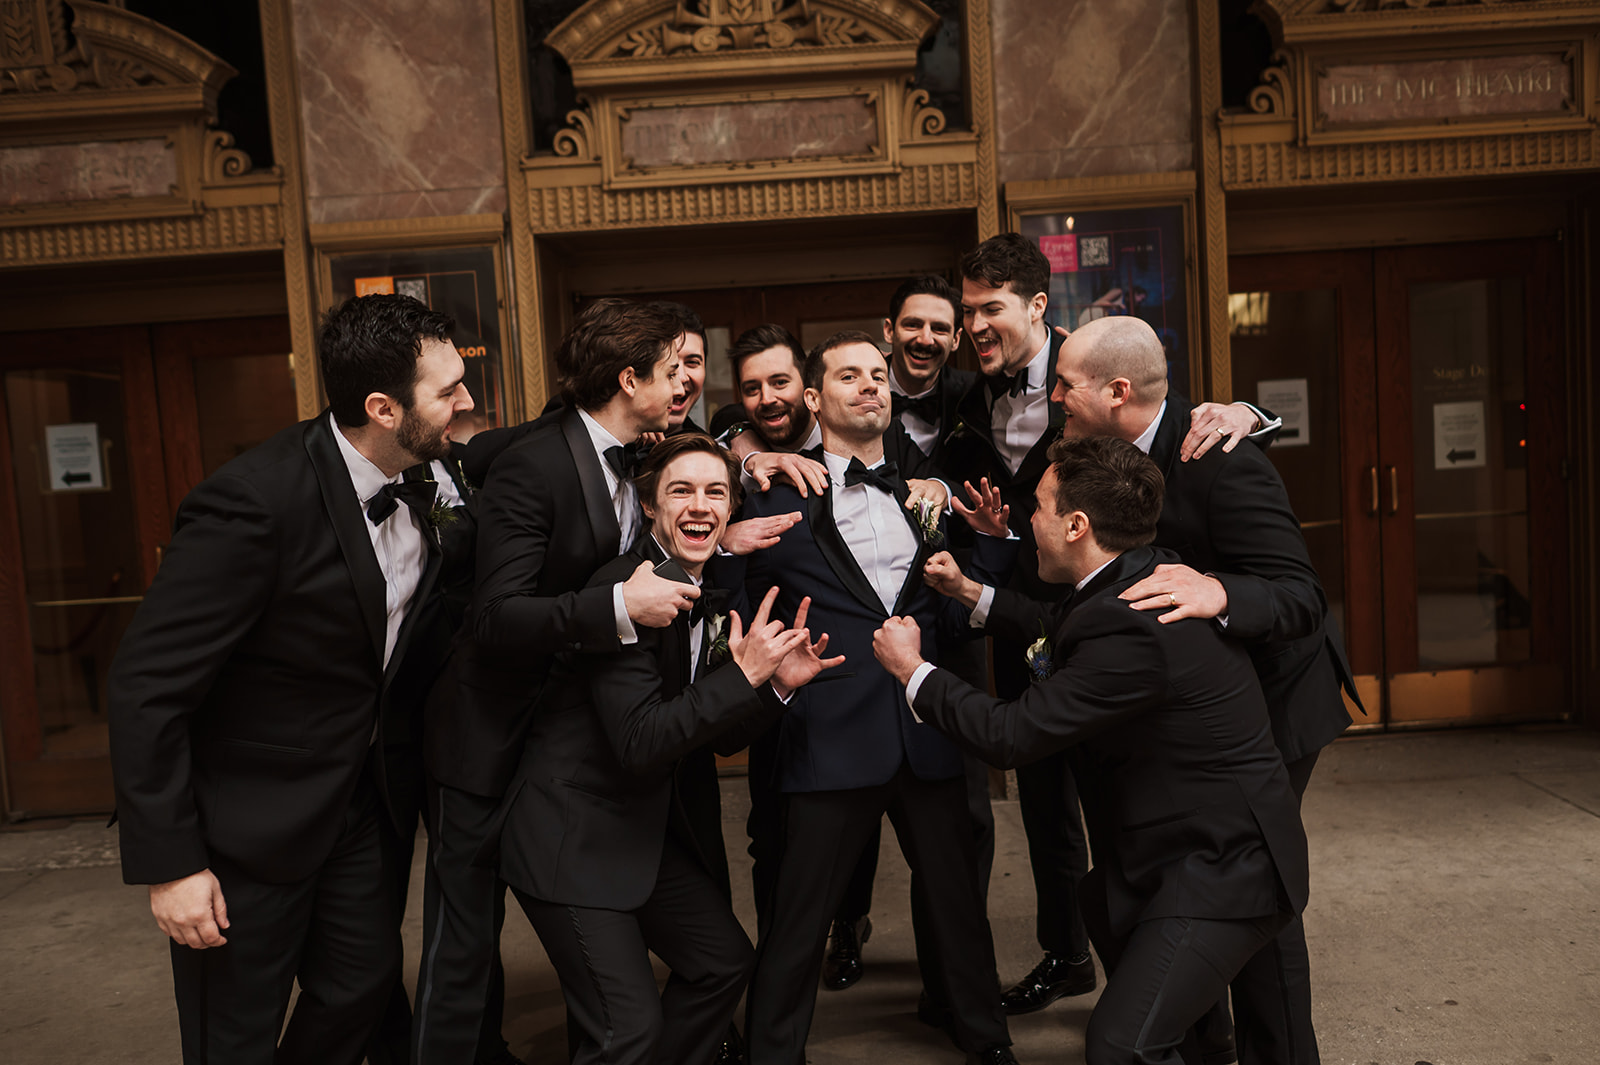 crazy wedding party photos at the Lyric Opera Chicago. black dresses and black suits